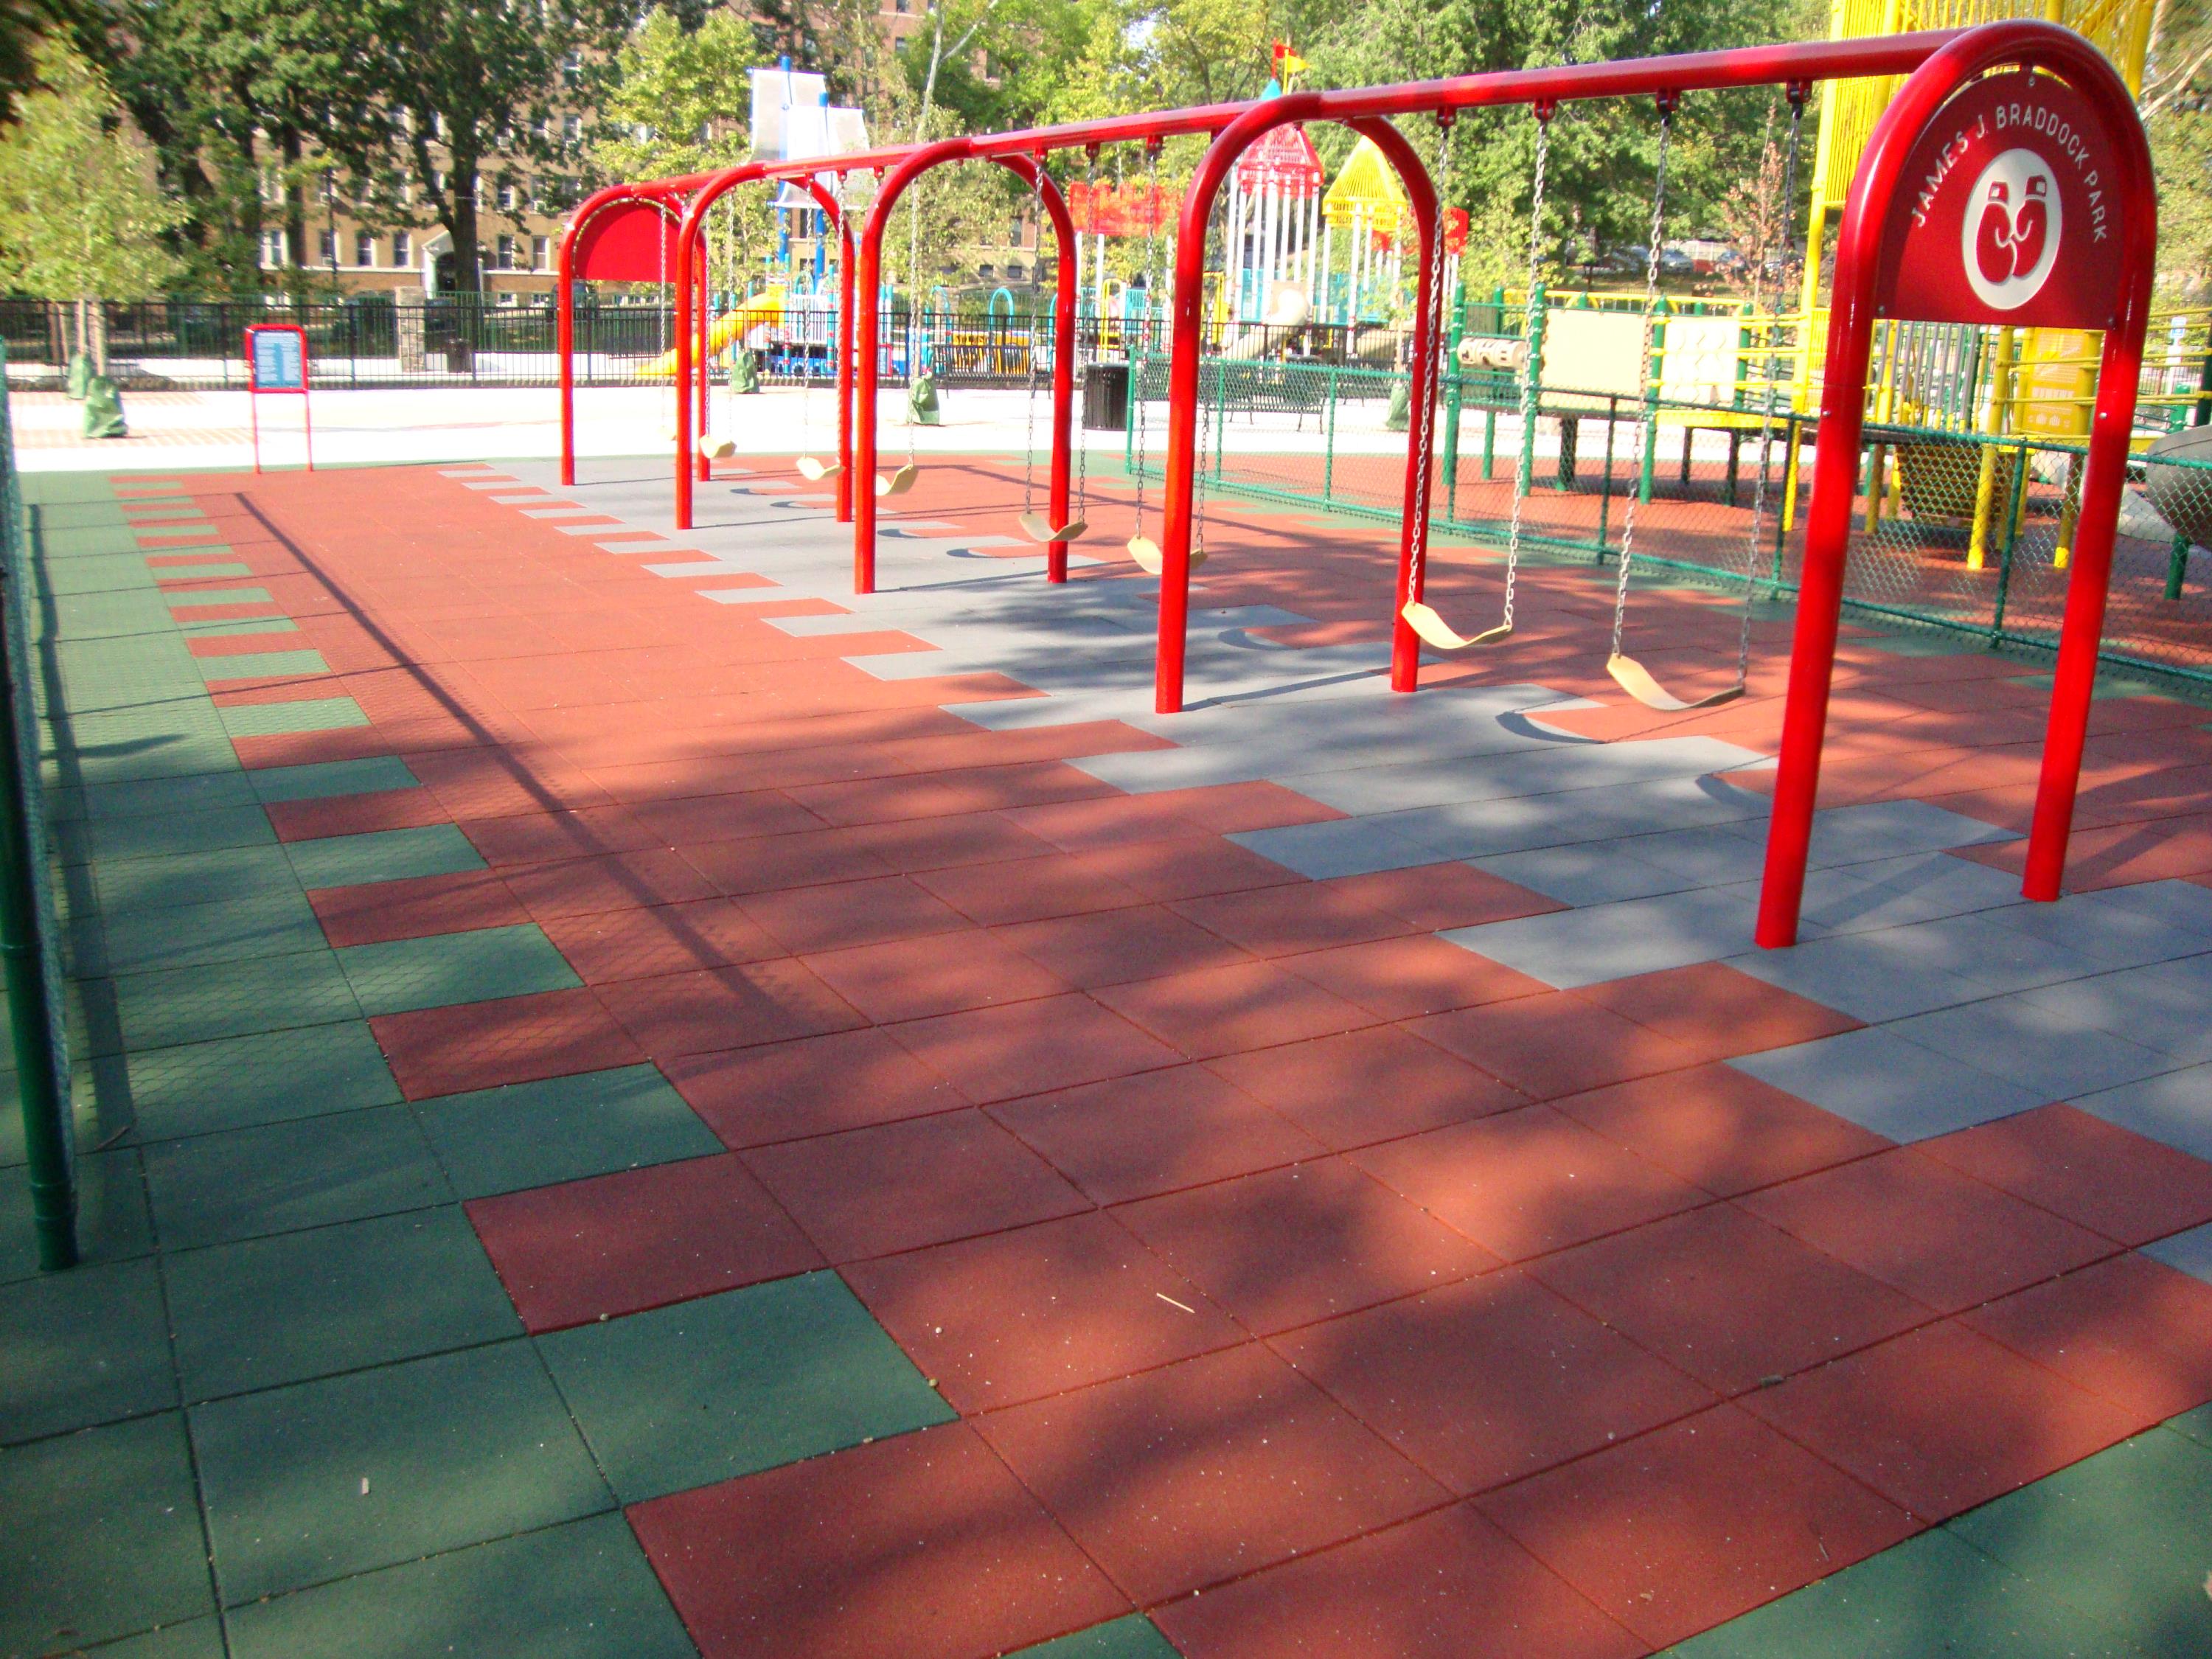 UNITY - Showing swing area at this park playground using Red Green and Grey